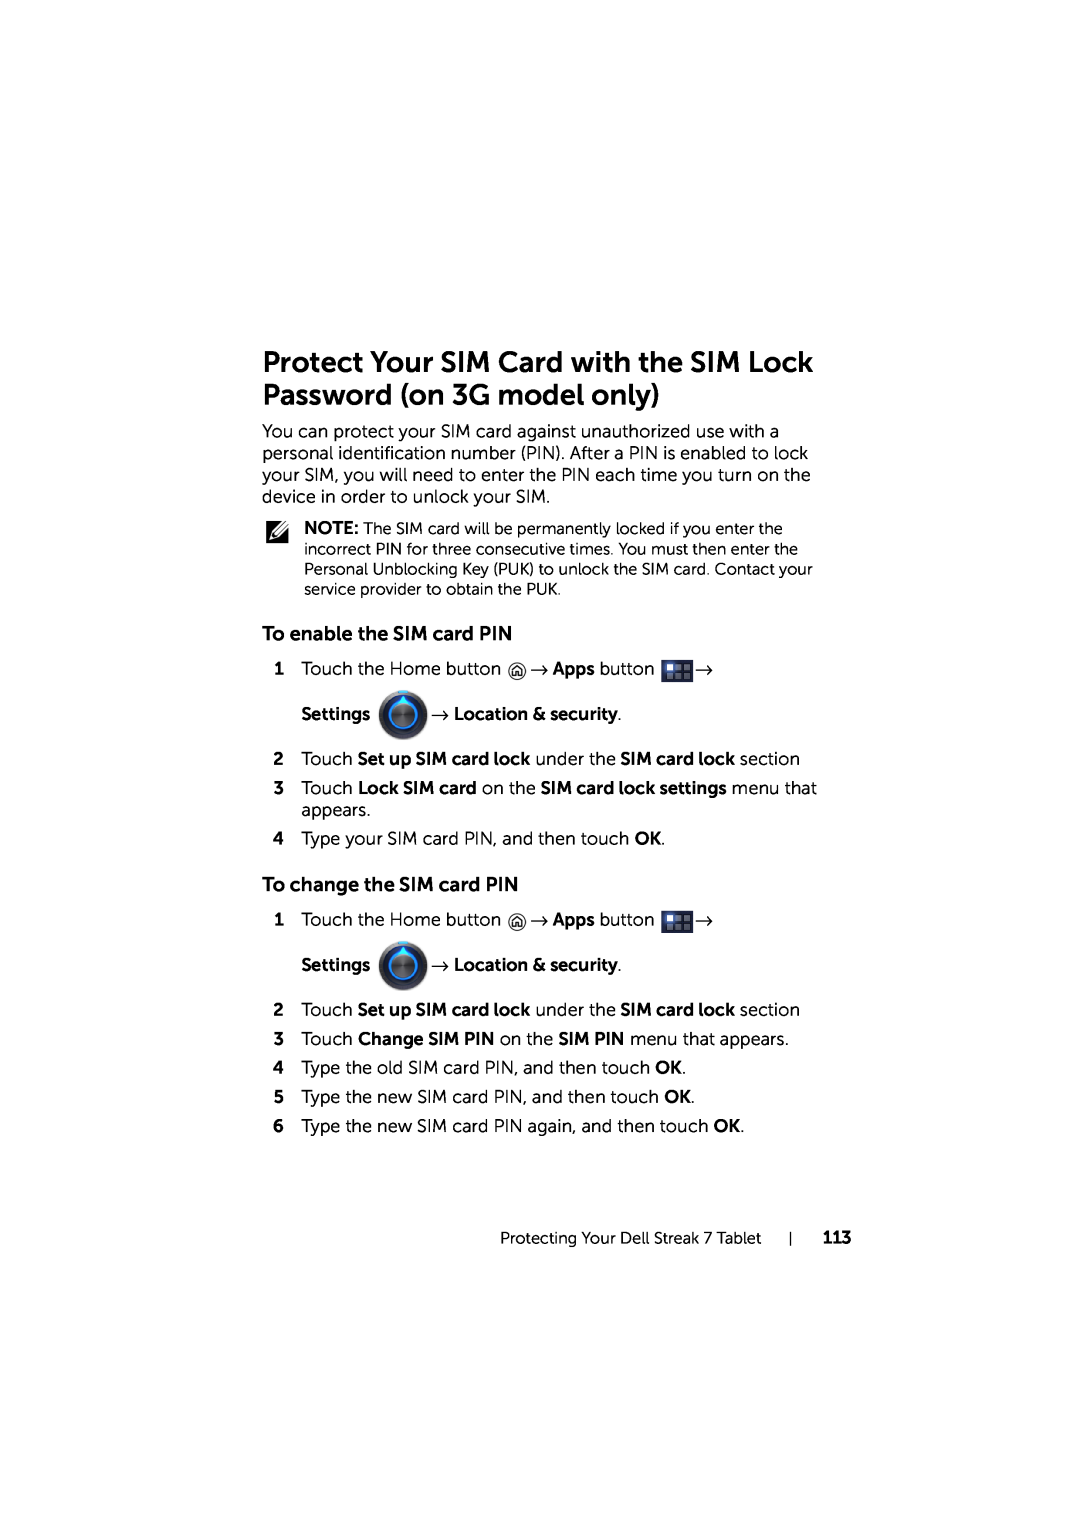 Dell LG7_bk0 user manual Protect Your SIM Card with the SIM Lock Password on 3G model only, To enable the SIM card PIN 